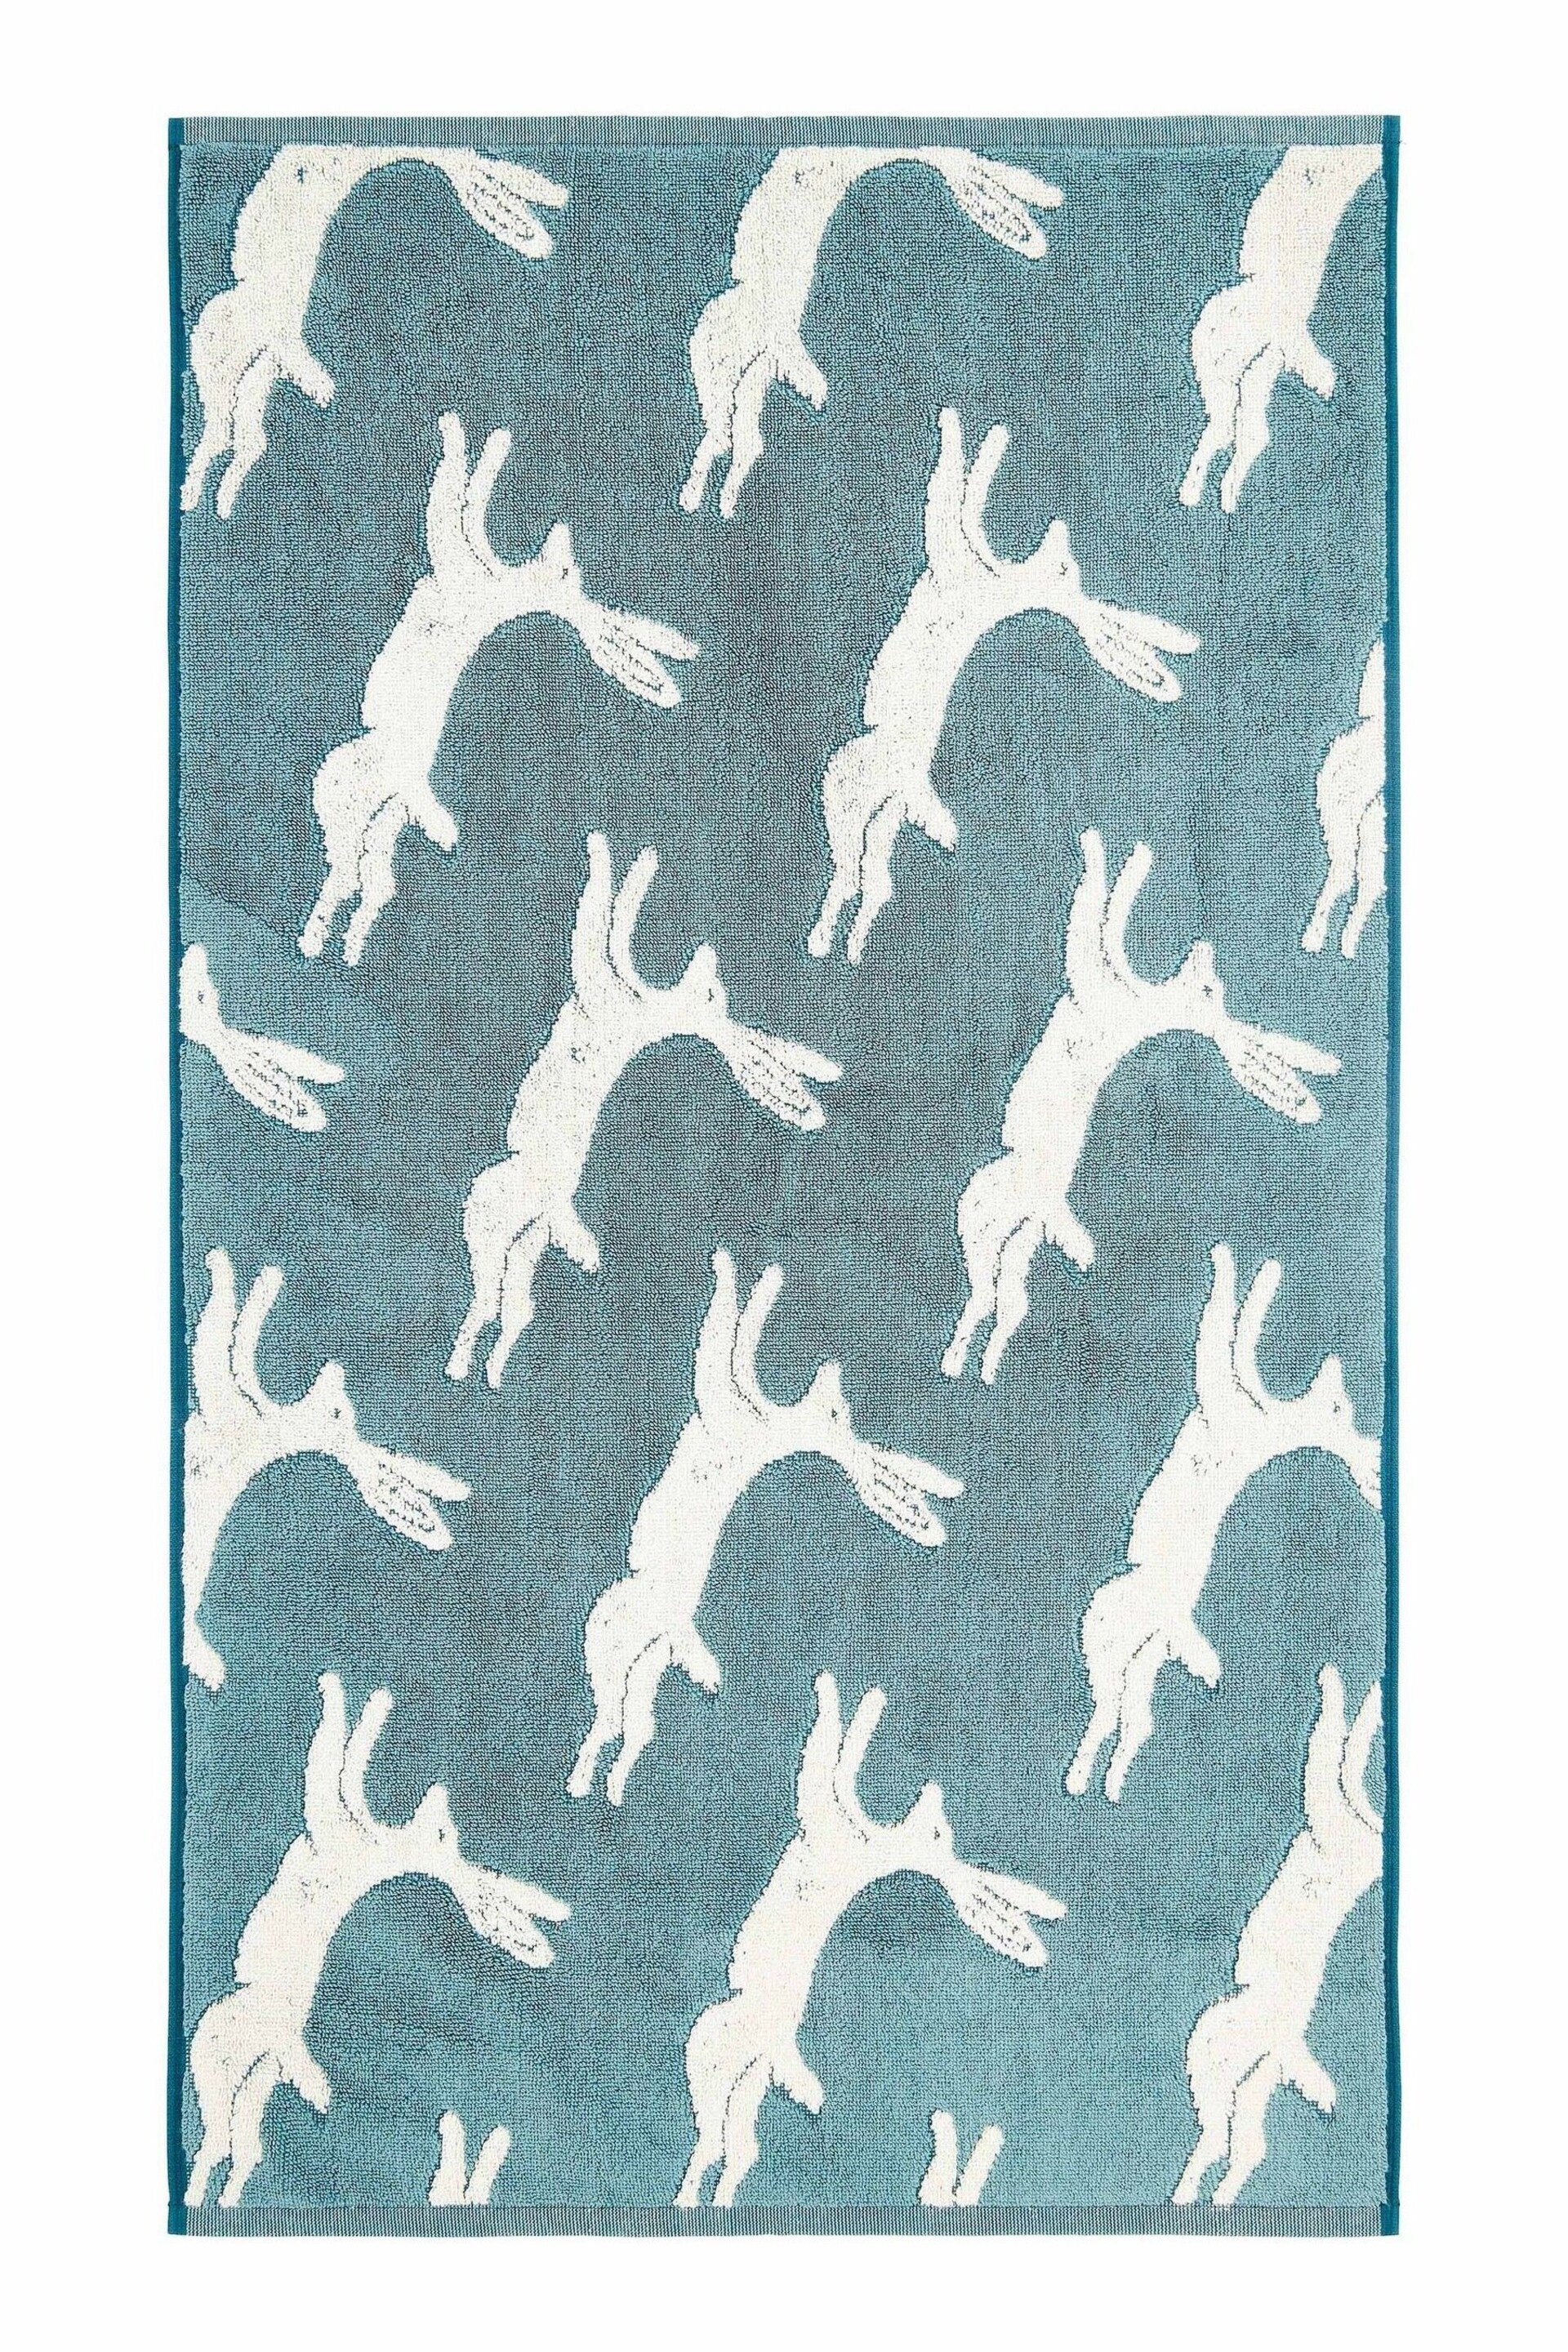 Joules Teal Jumping Hare Bath Mat - Image 2 of 2